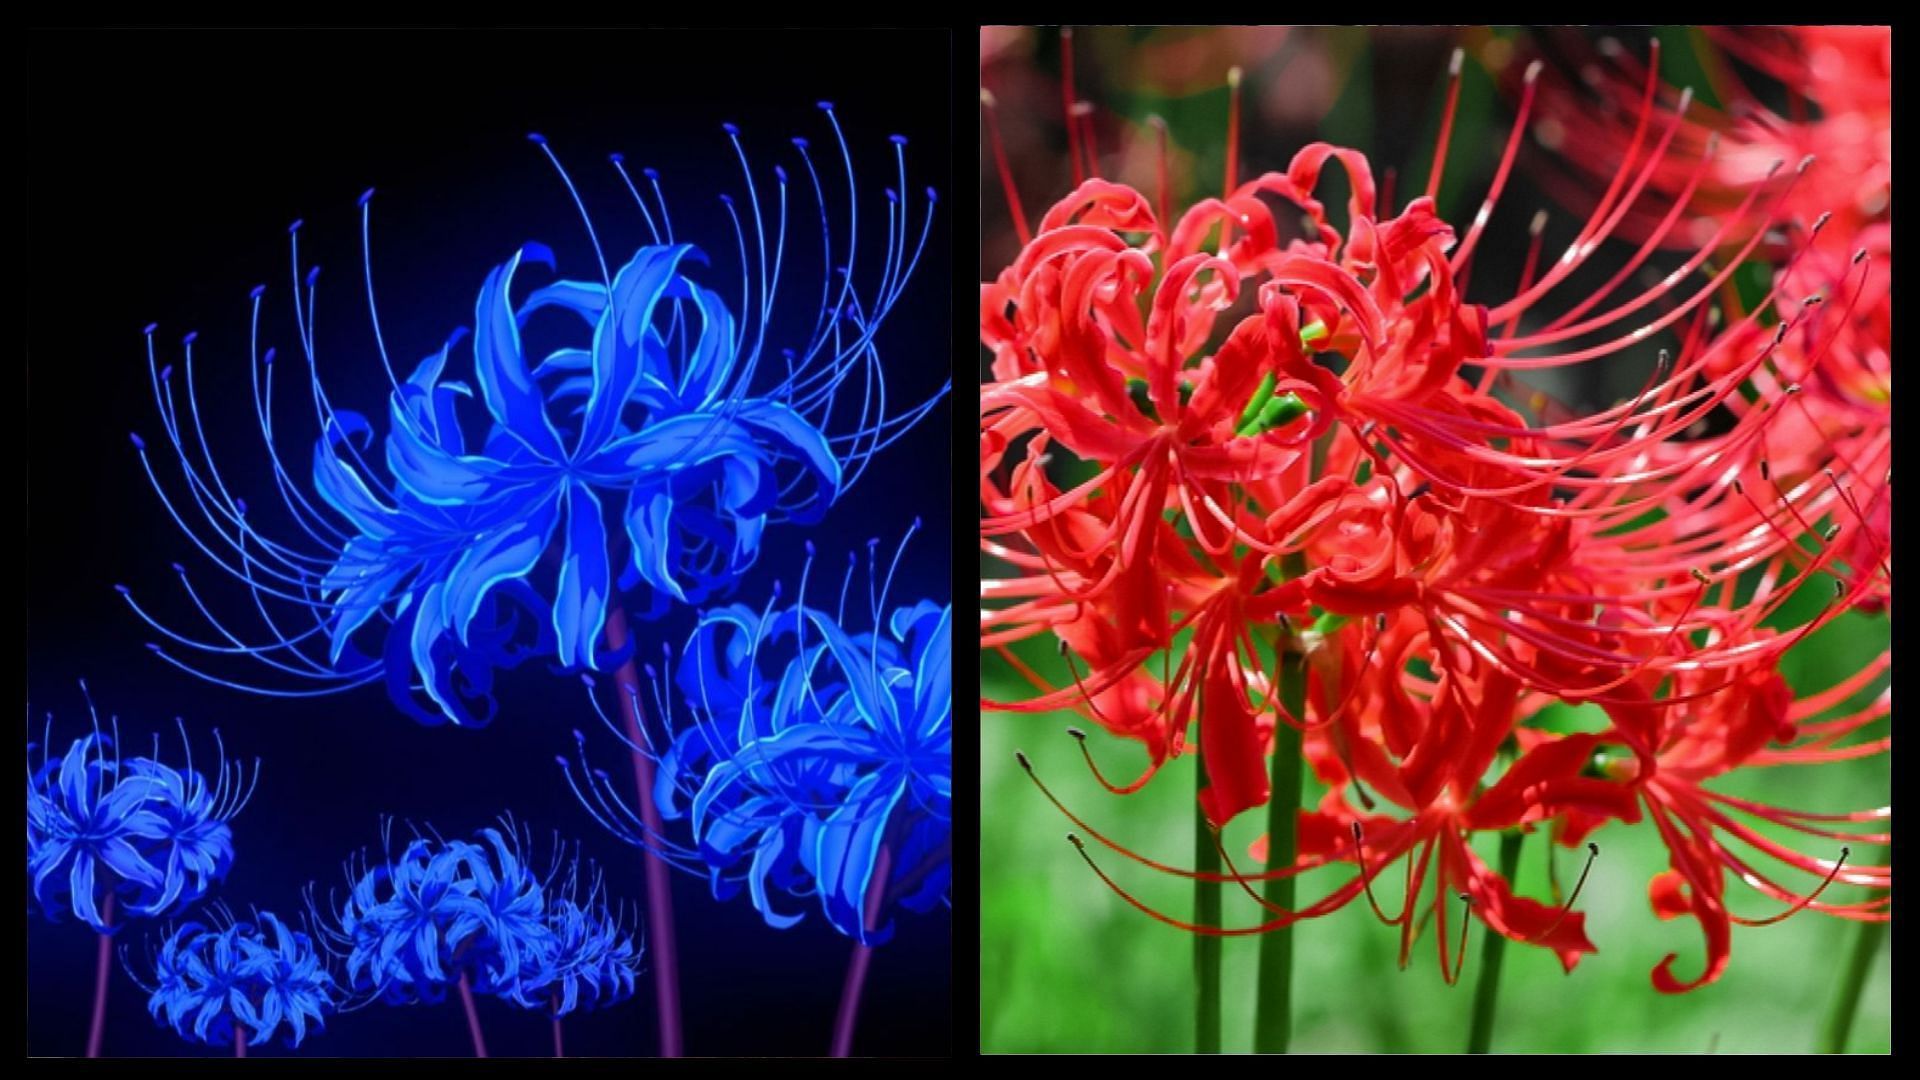 Blue Spider Lily from the anime and Spider Lily in real life (Image via Sportskeeda)